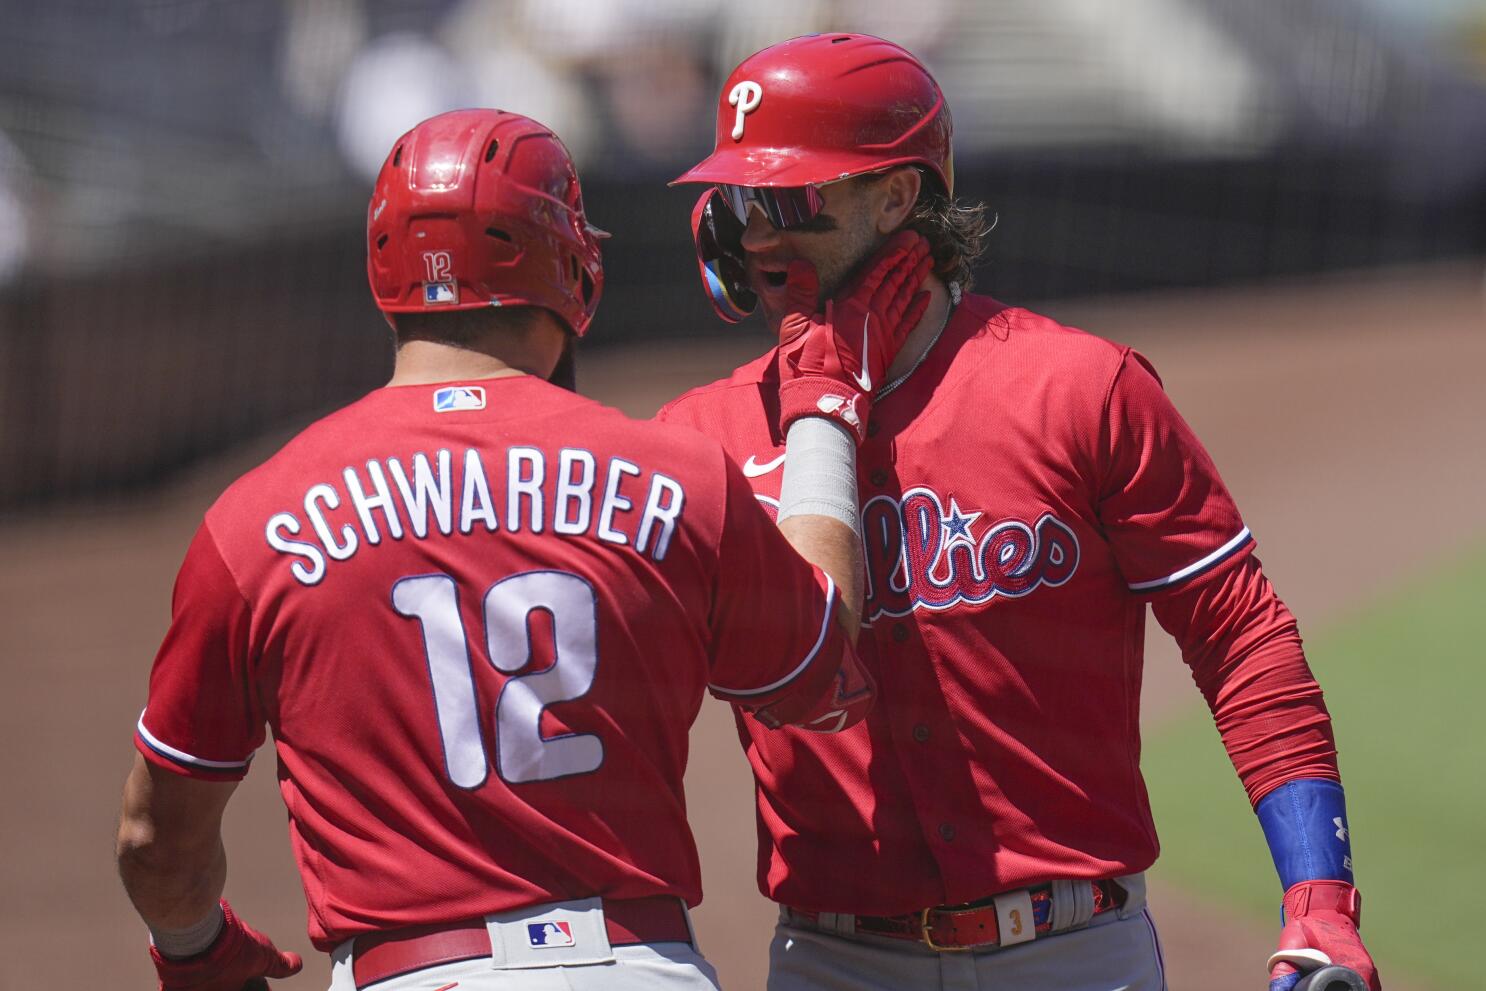 Schwarber homers again at Petco Park as the Phillies beat the